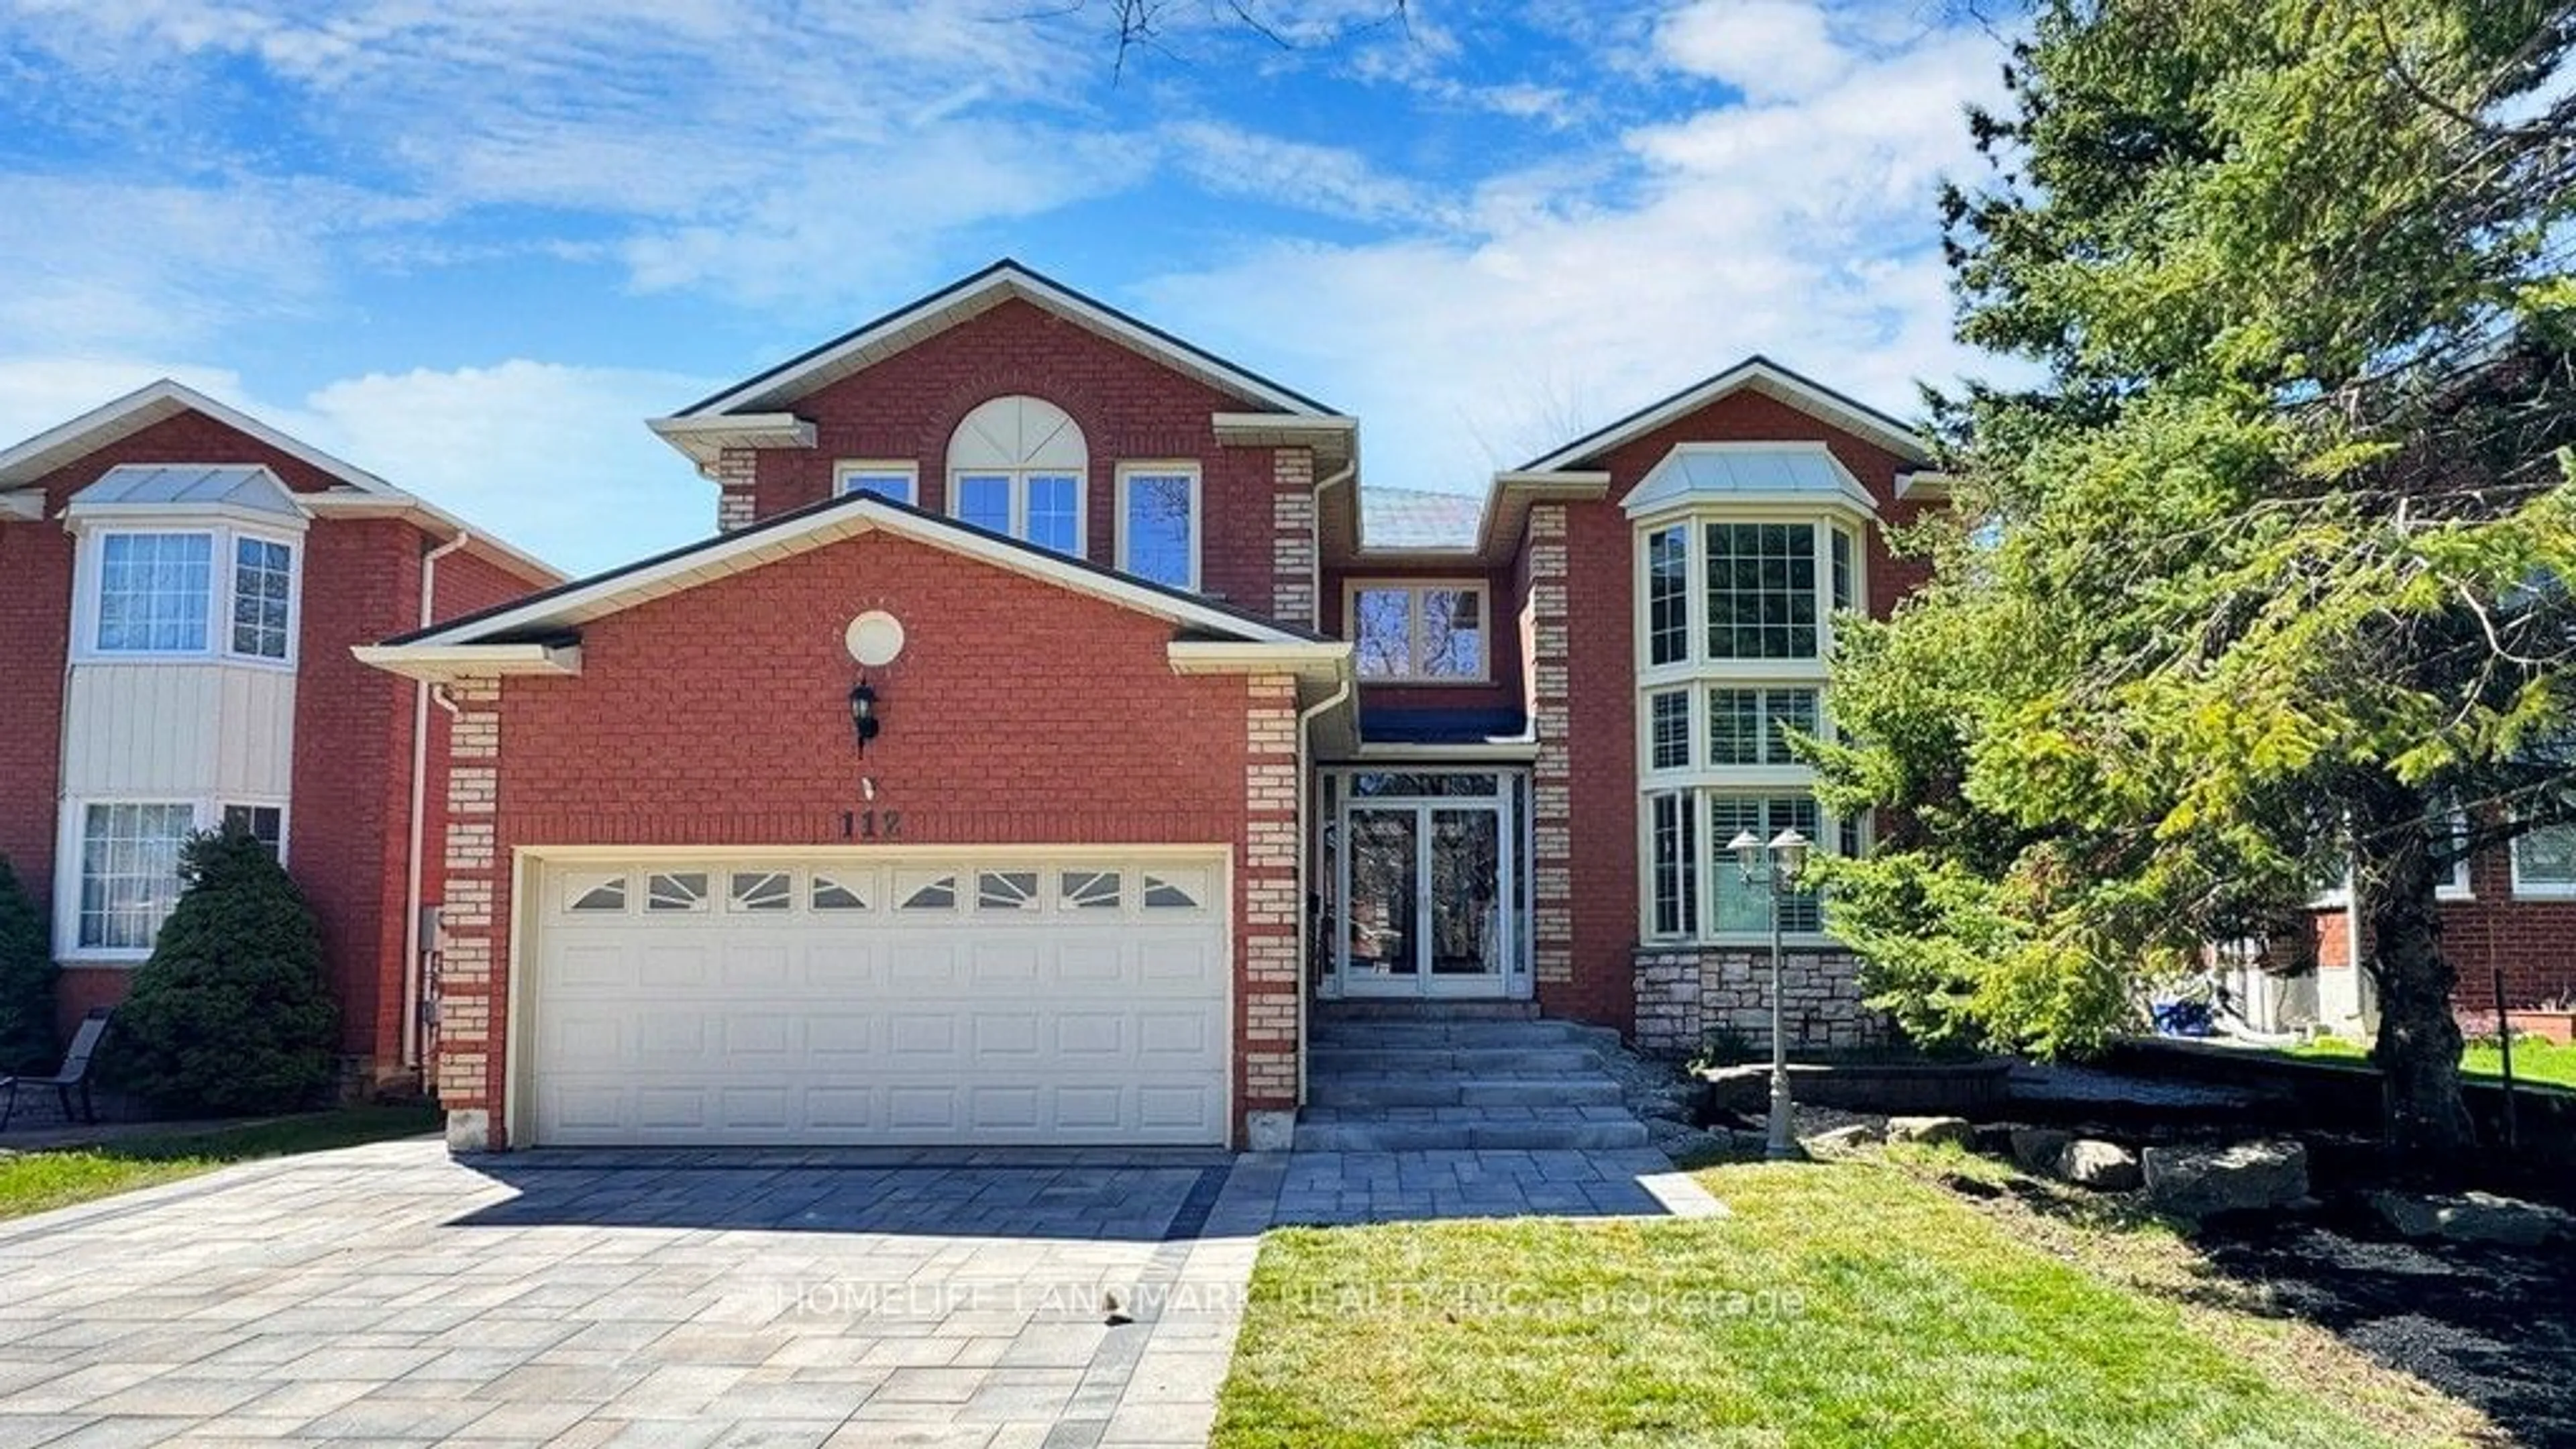 Home with brick exterior material for 112 Fitzgerald Ave, Markham Ontario L3R 9Y9